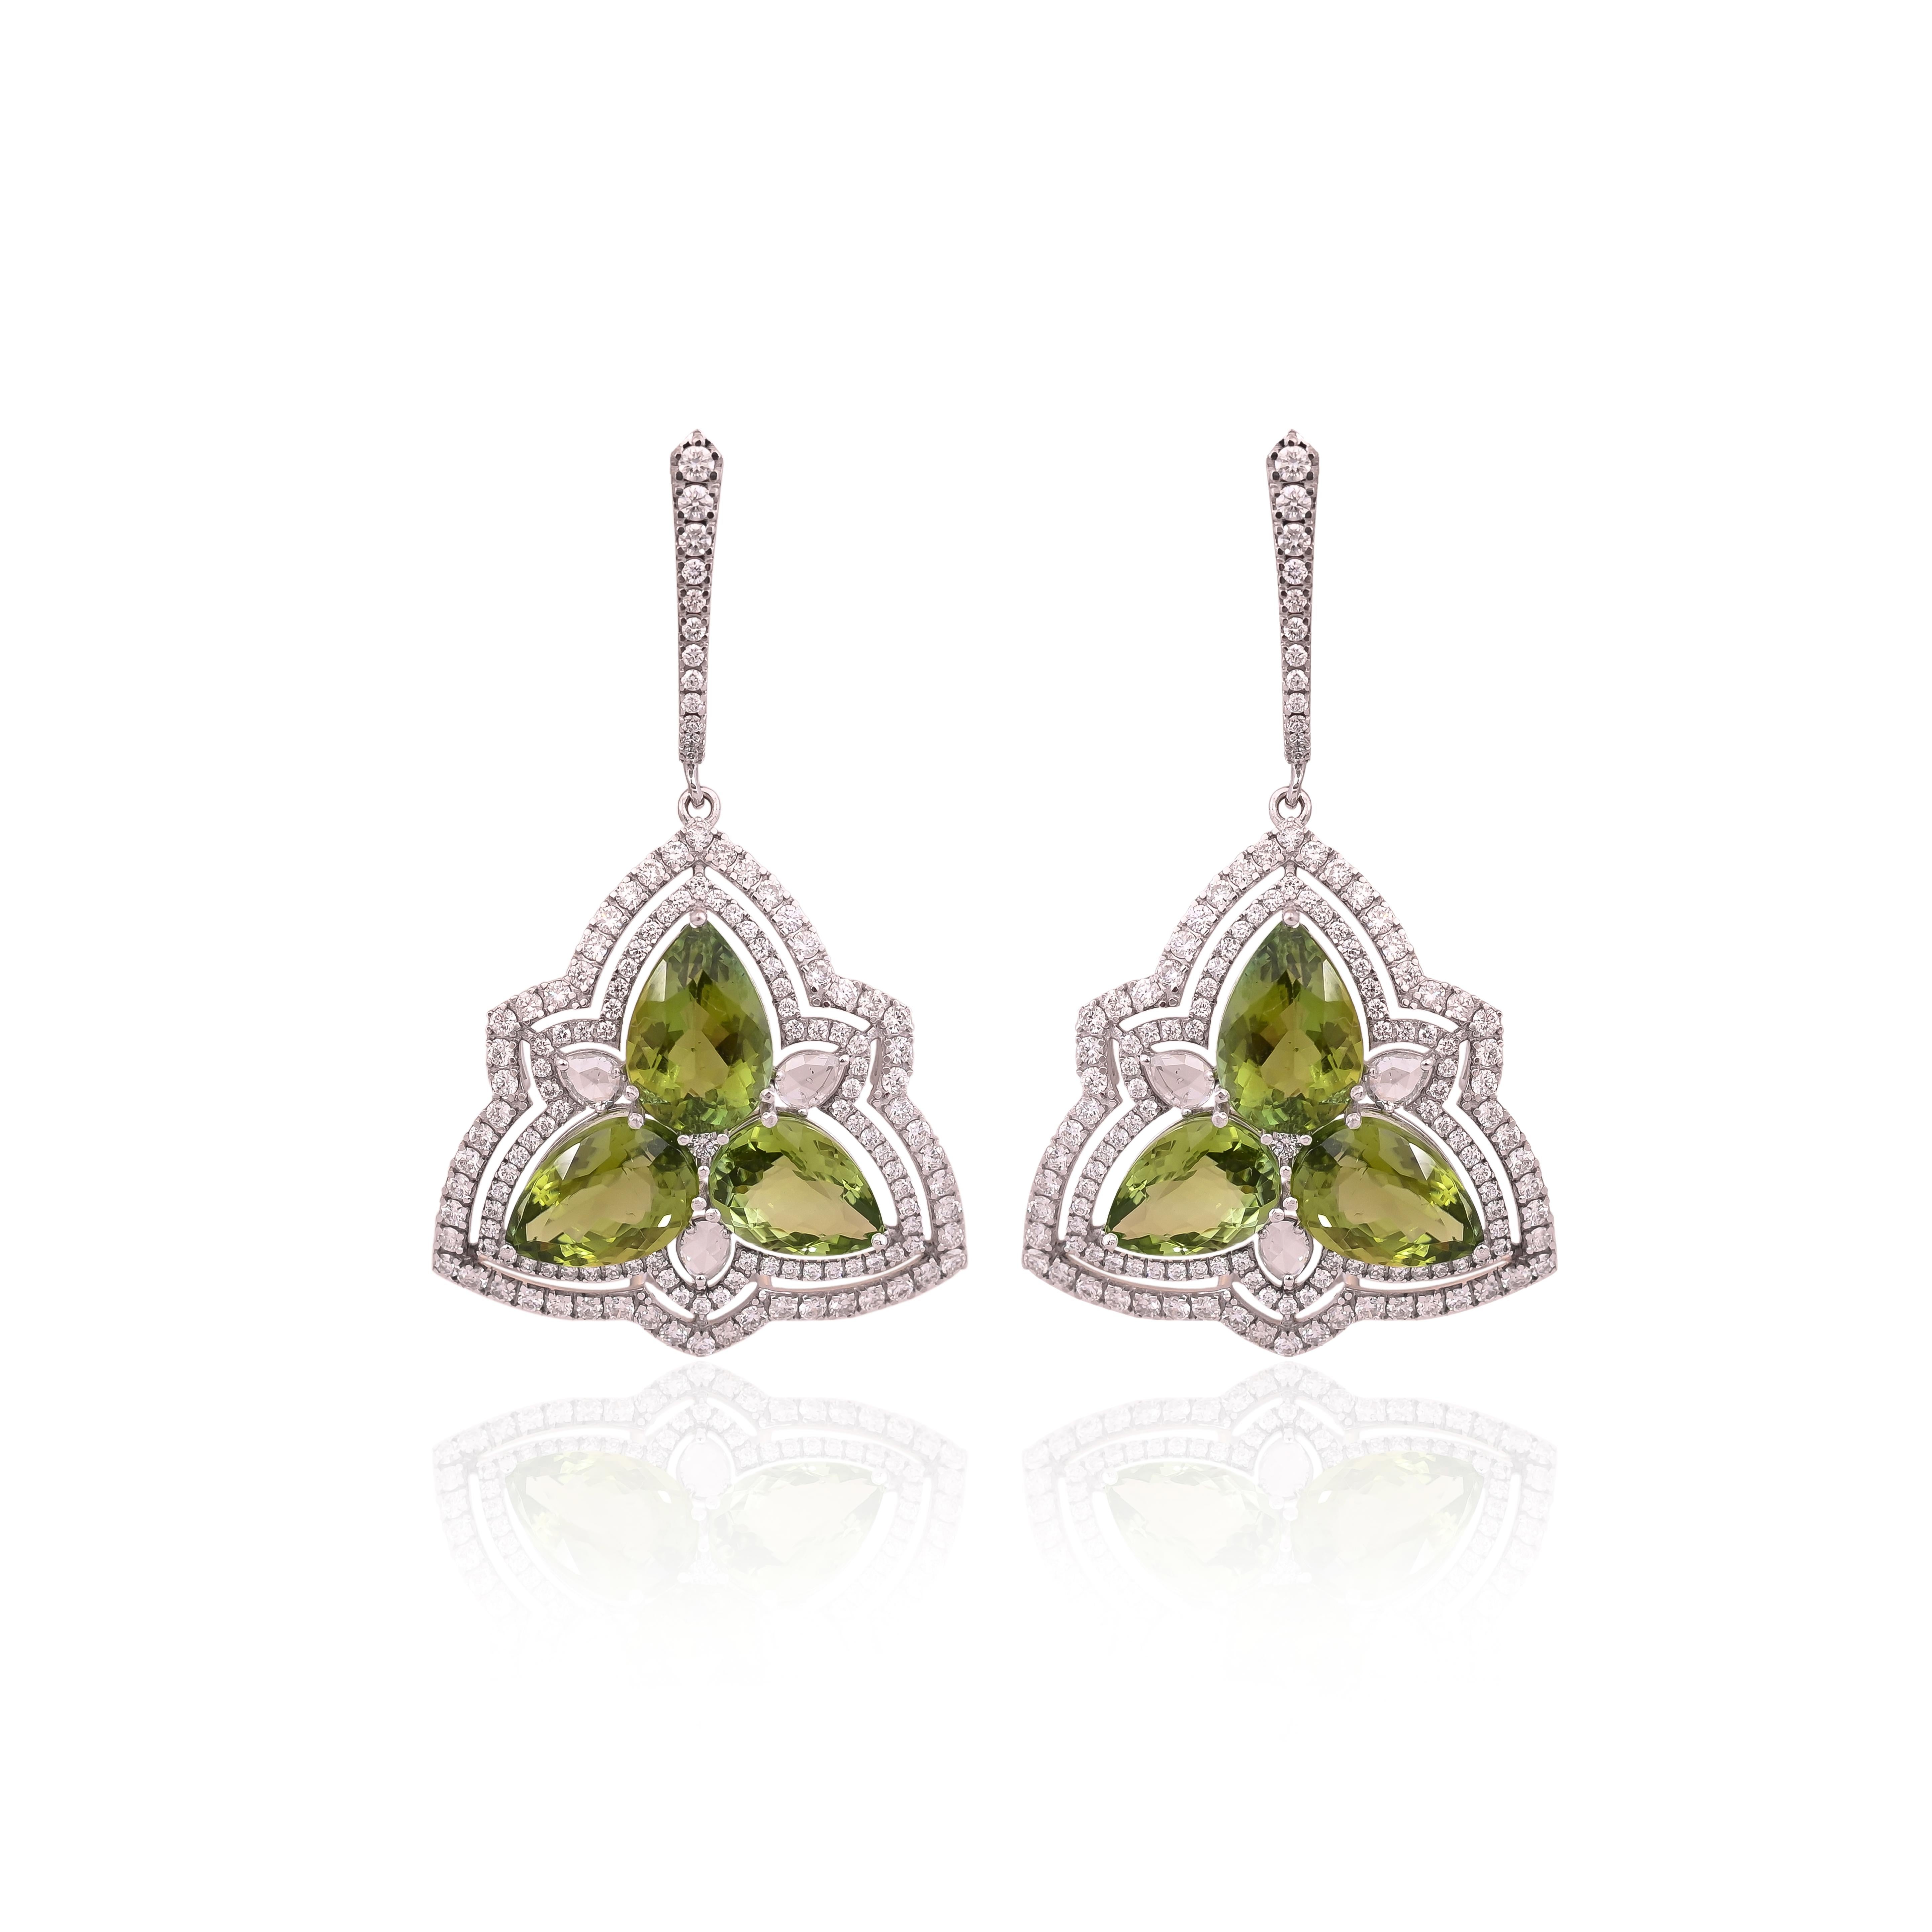 A very gorgeous and modern style, Green tourmaline Dangle Earrings set in 18K White Gold & Diamonds. The weight of the Green Tourmalines is 17.38 carats. The combined Diamonds weight is 3.39 carats. Net 18K White Gold weight is 8.19 grams. The gross